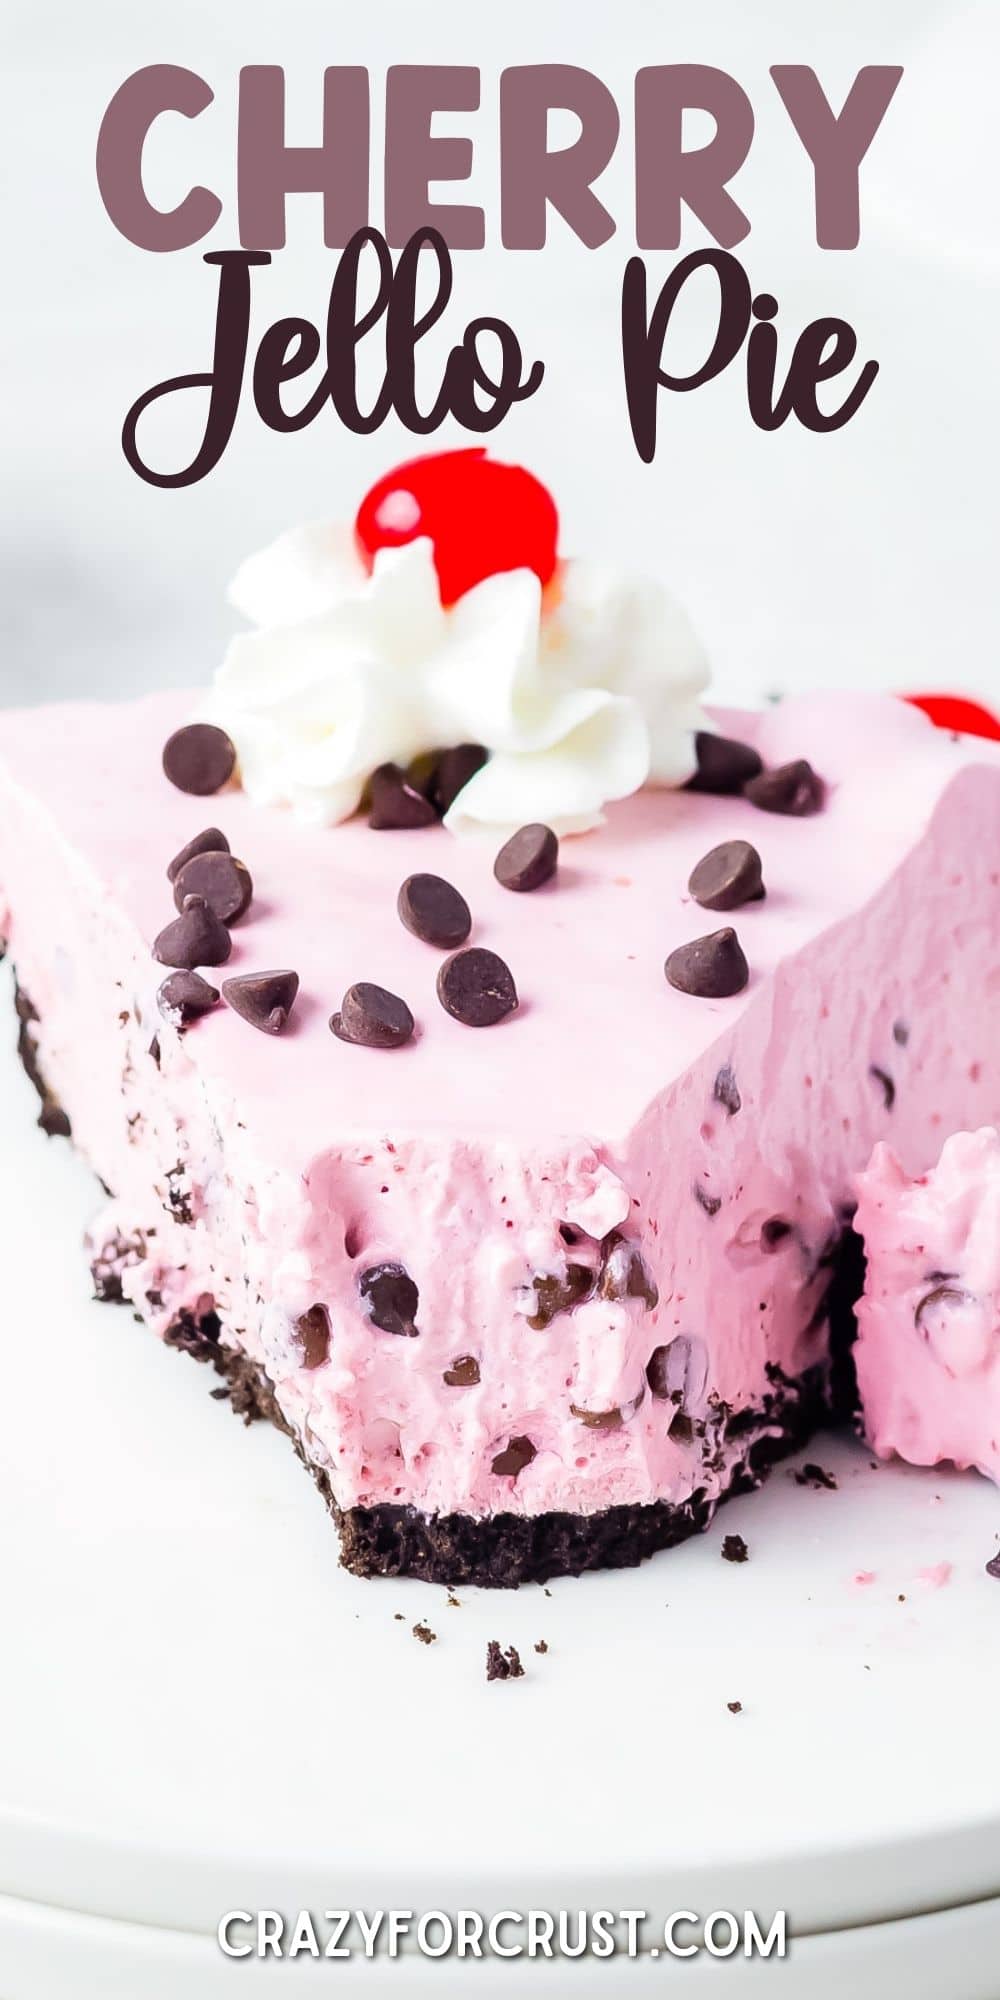 One large slice of cherry jello pie topped with chocolate chips, whipped cream and cherry with first bite missing and recipe title on top of image